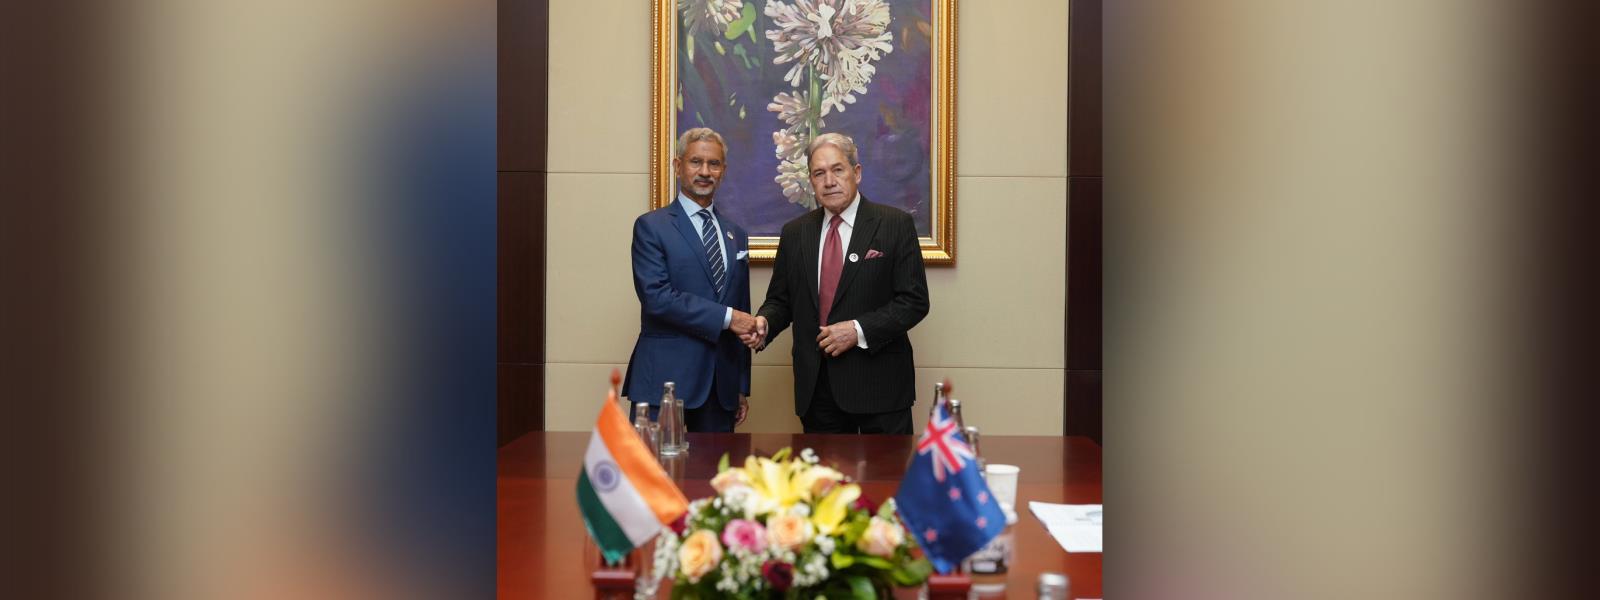 External Affairs Minister Dr. S. Jaishankar met H.E. Mr. Winston Peters, Deputy Prime Minister and Foreign Minister of New Zealand on the sidelines of ASEAN meetings in Vientiane